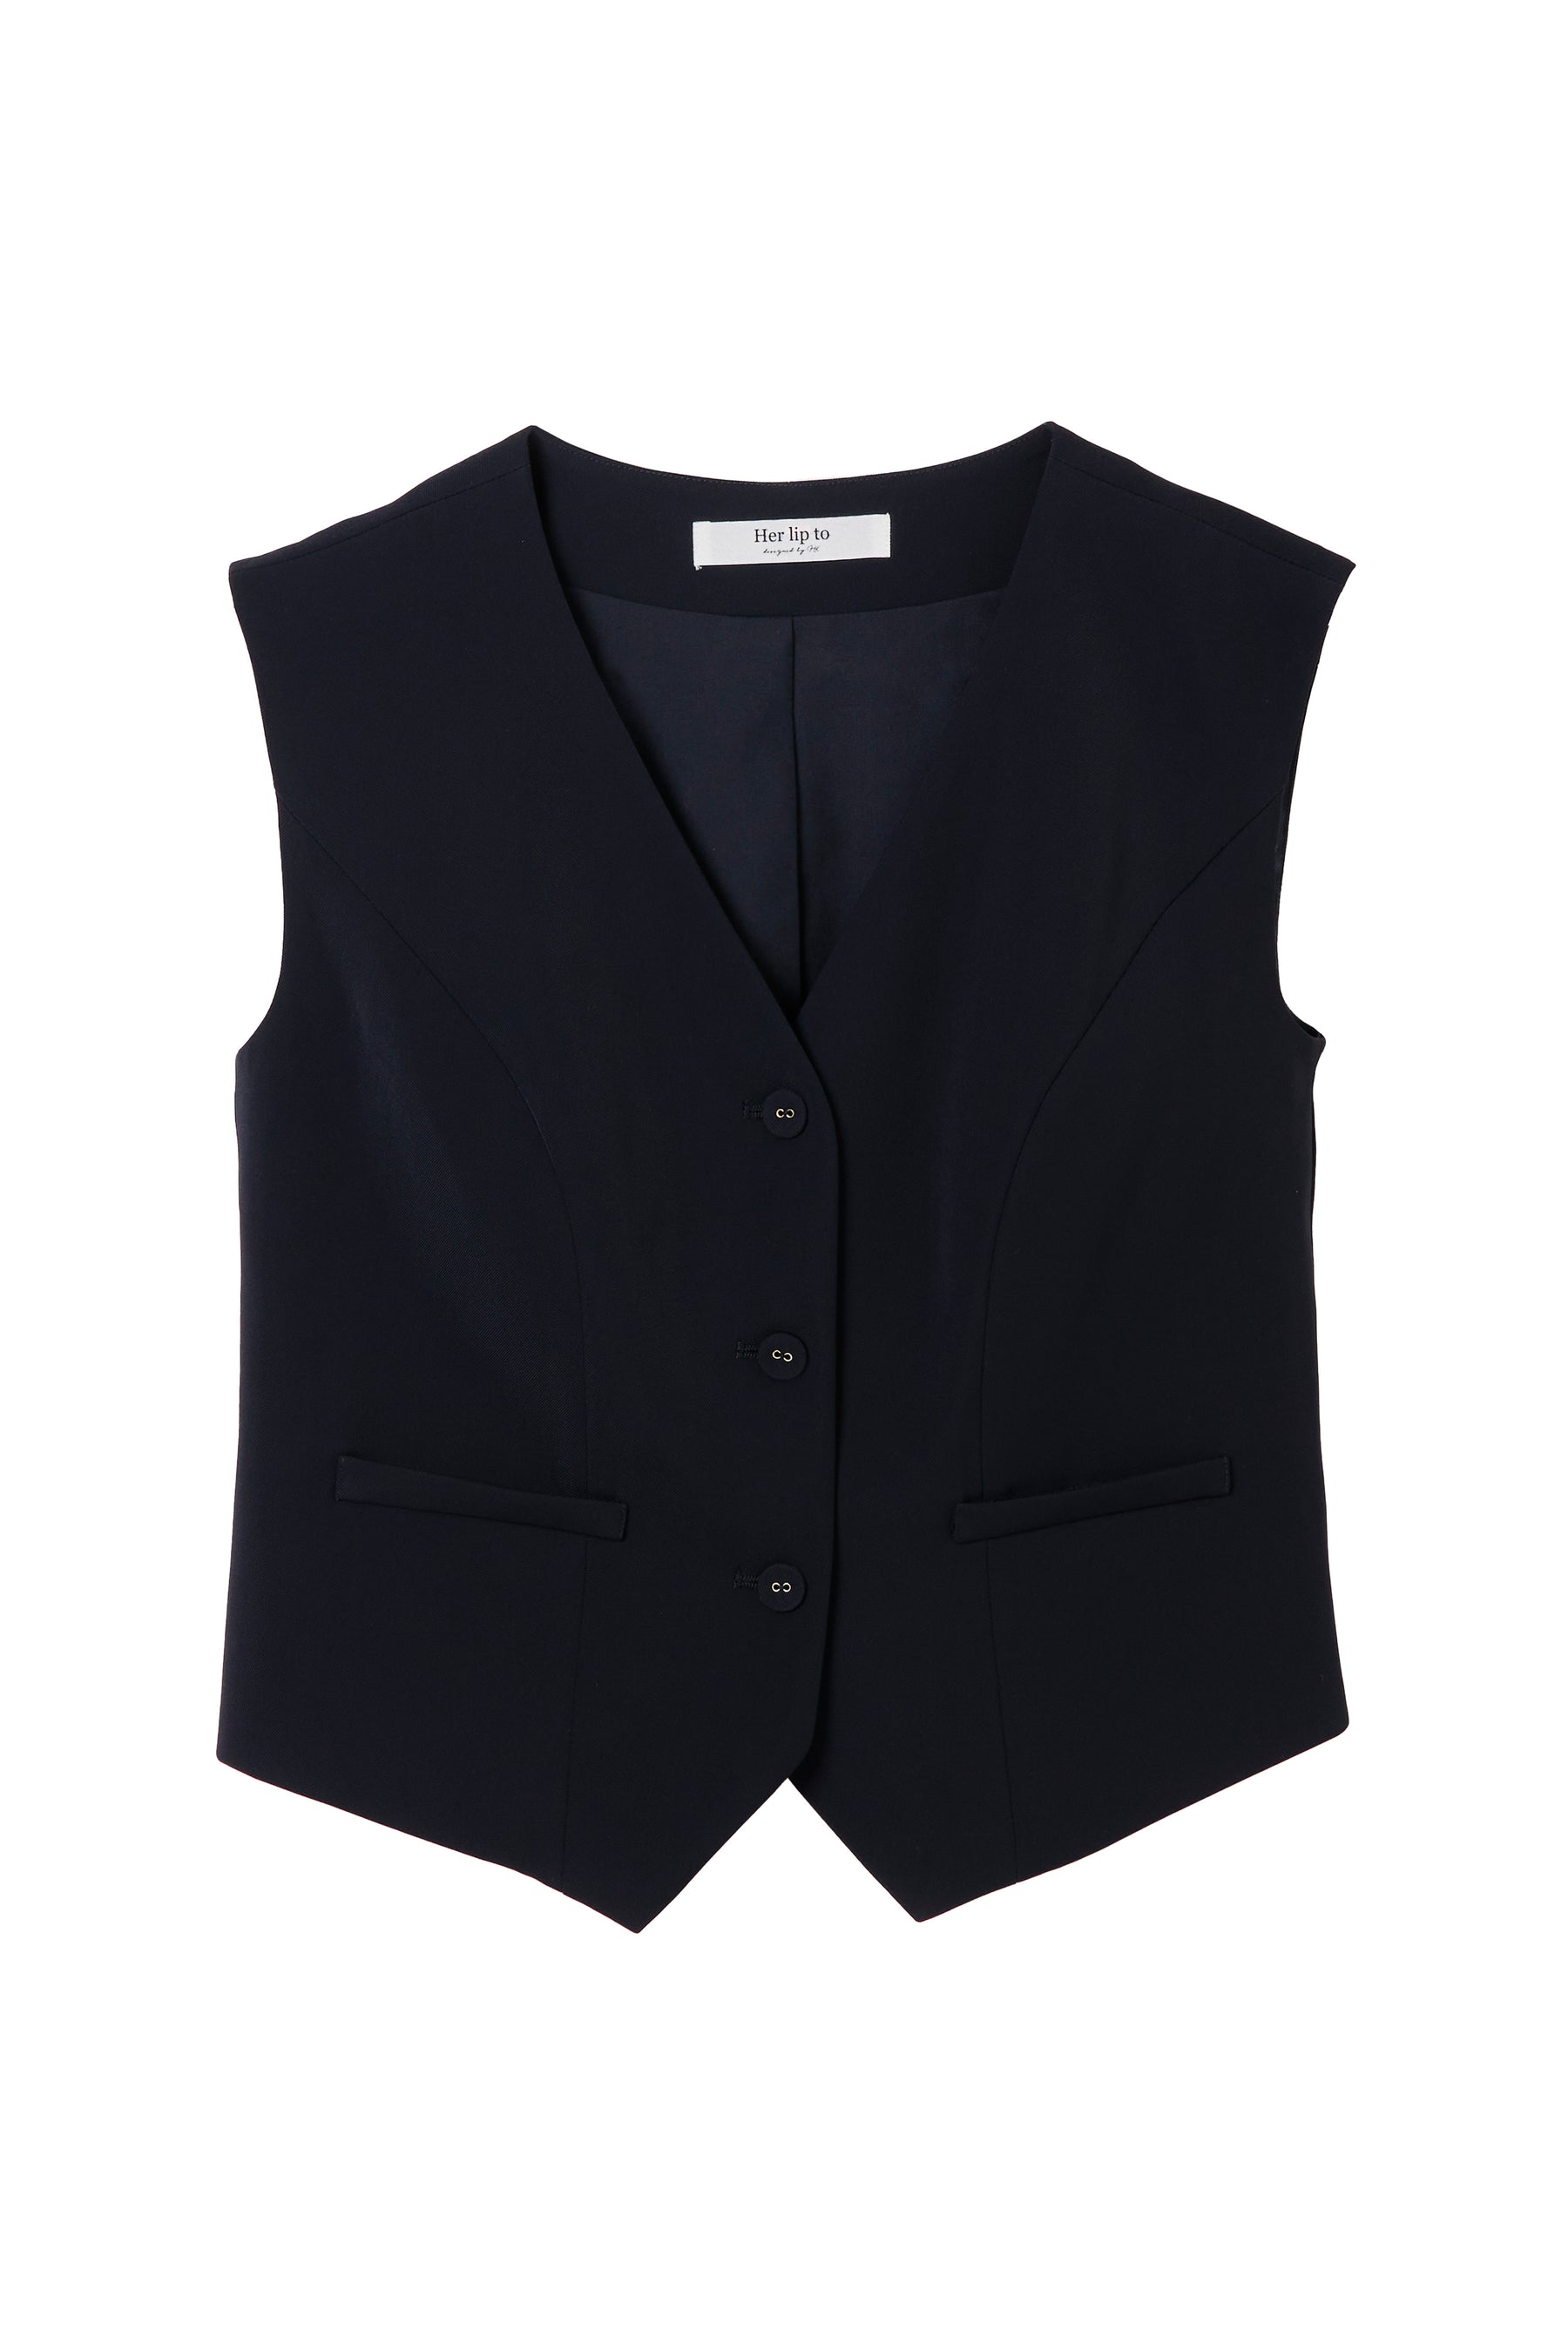 [Shipped in late March] SoHo Twill Vest